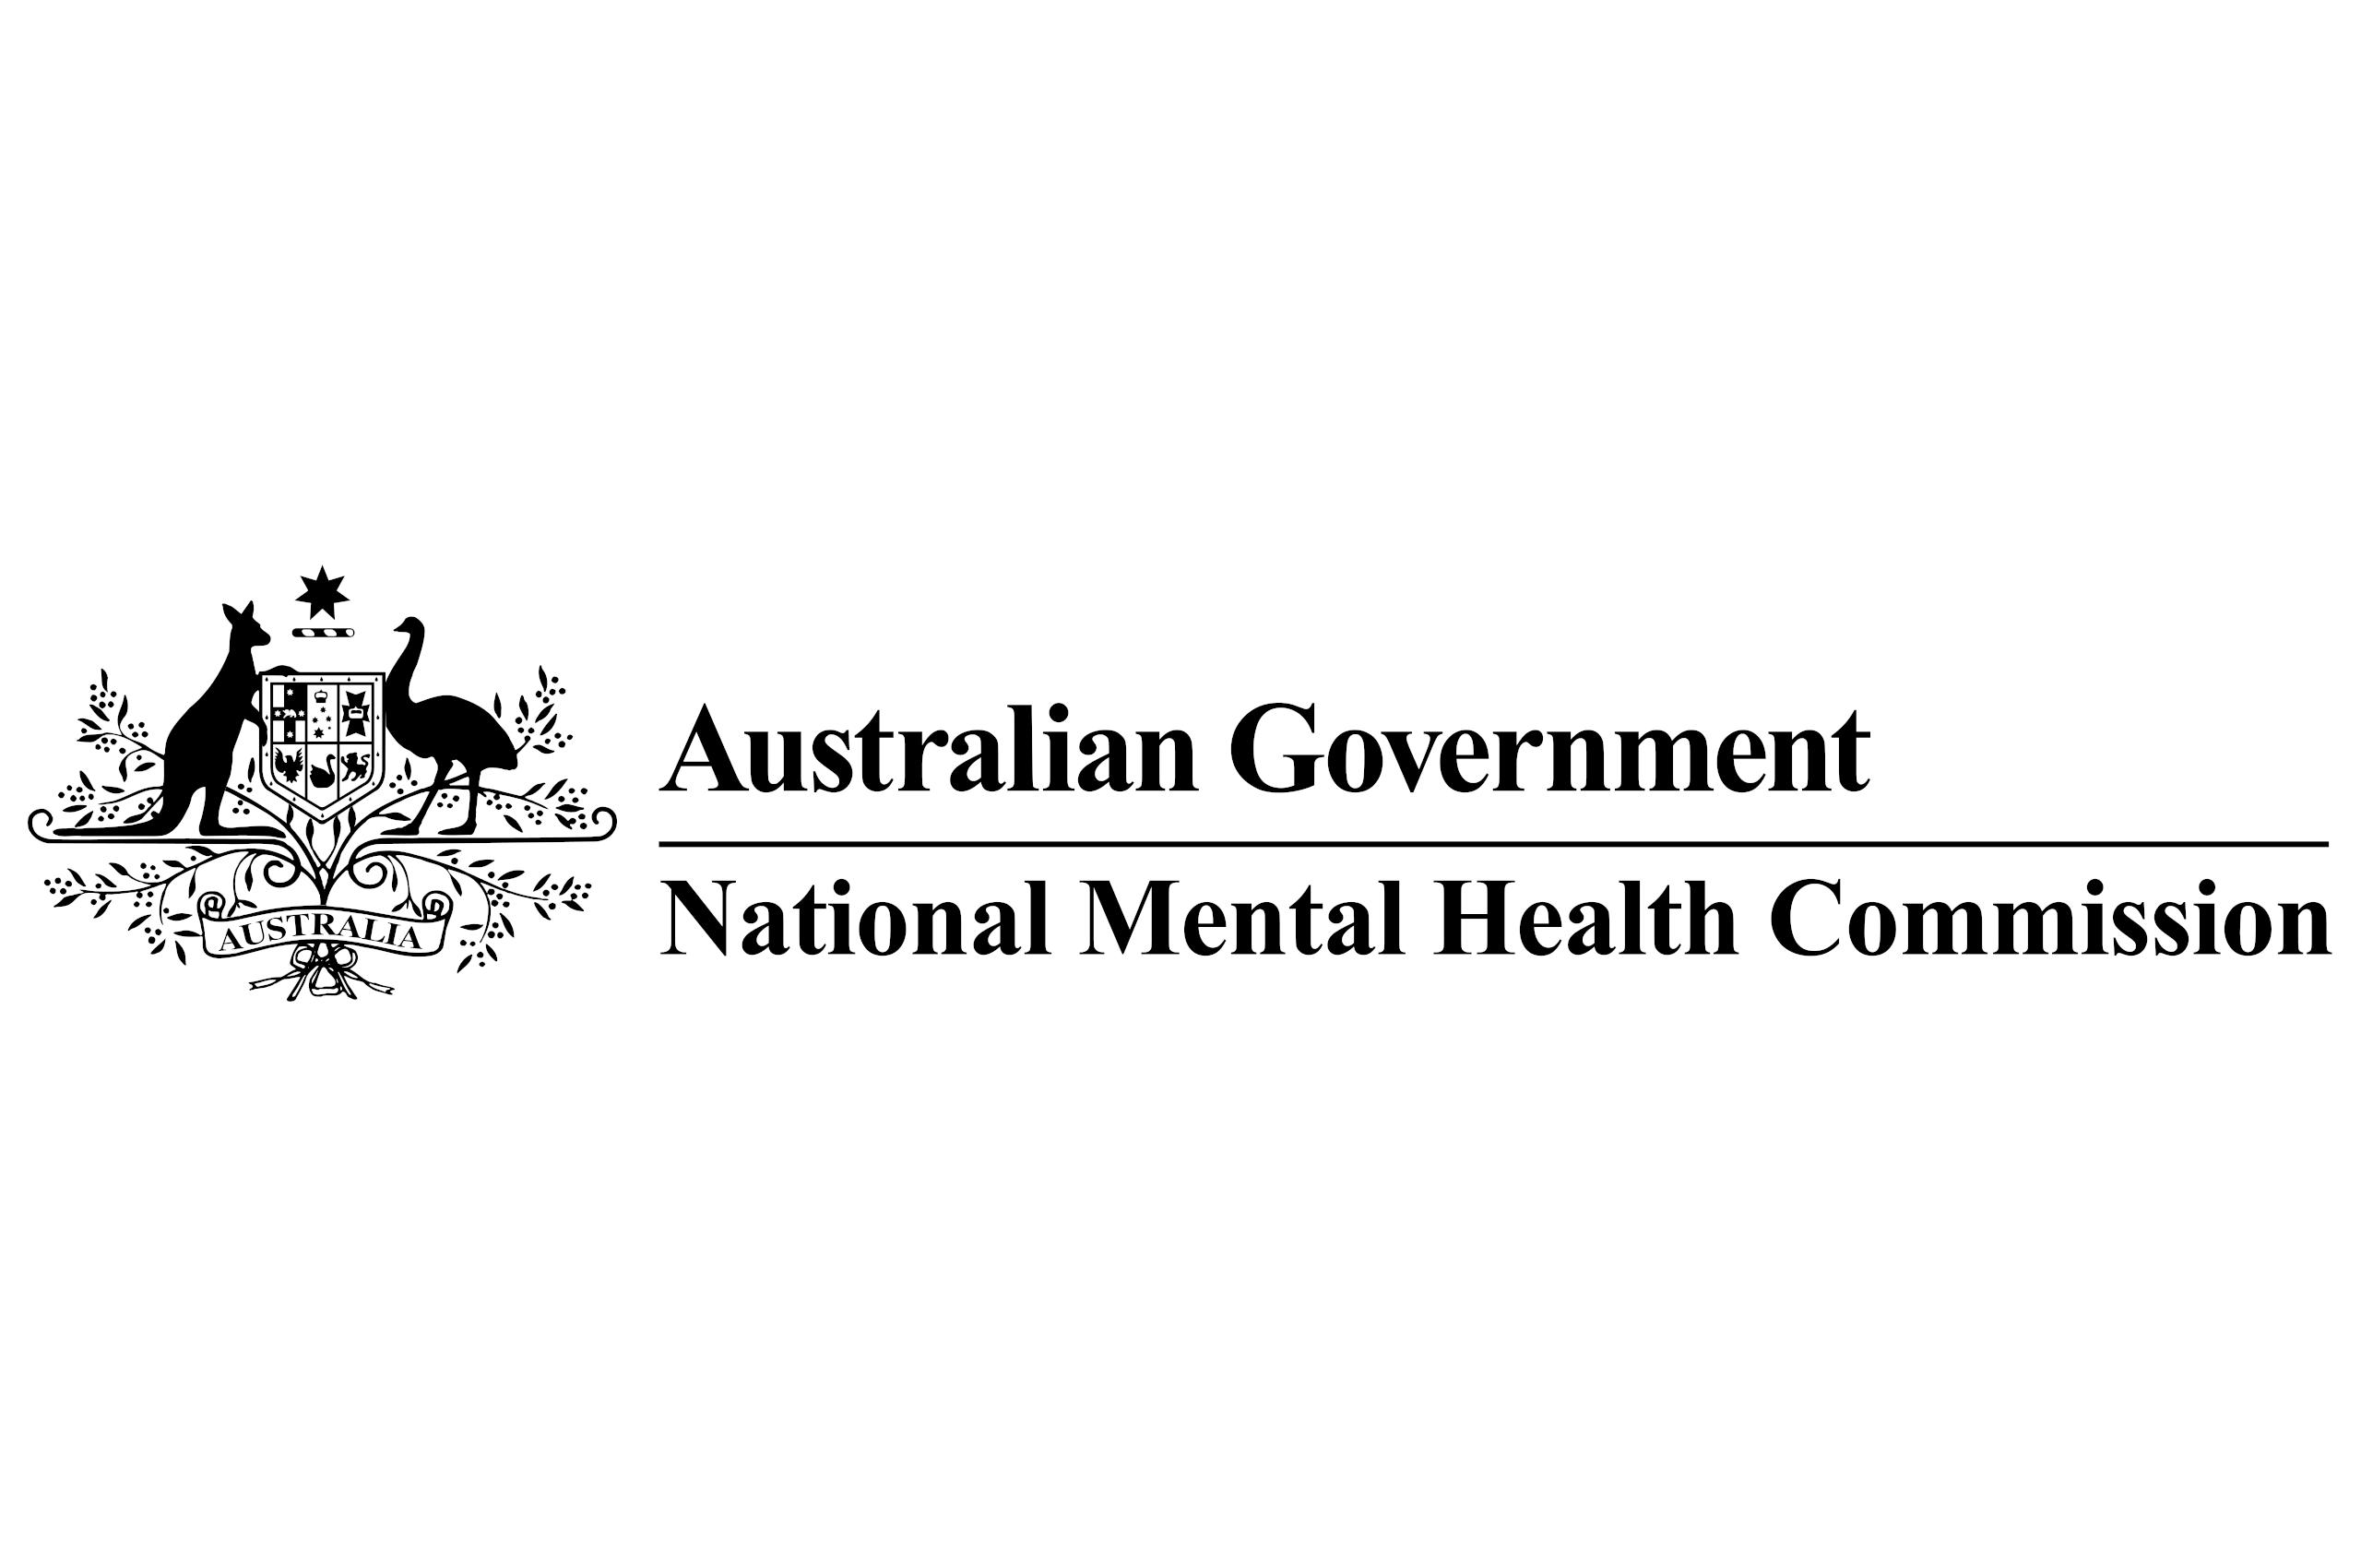 Commonwealth Government crest with emu, kangaroo, shield and wattle, and the words 'Australian Government National Mental Health Commission